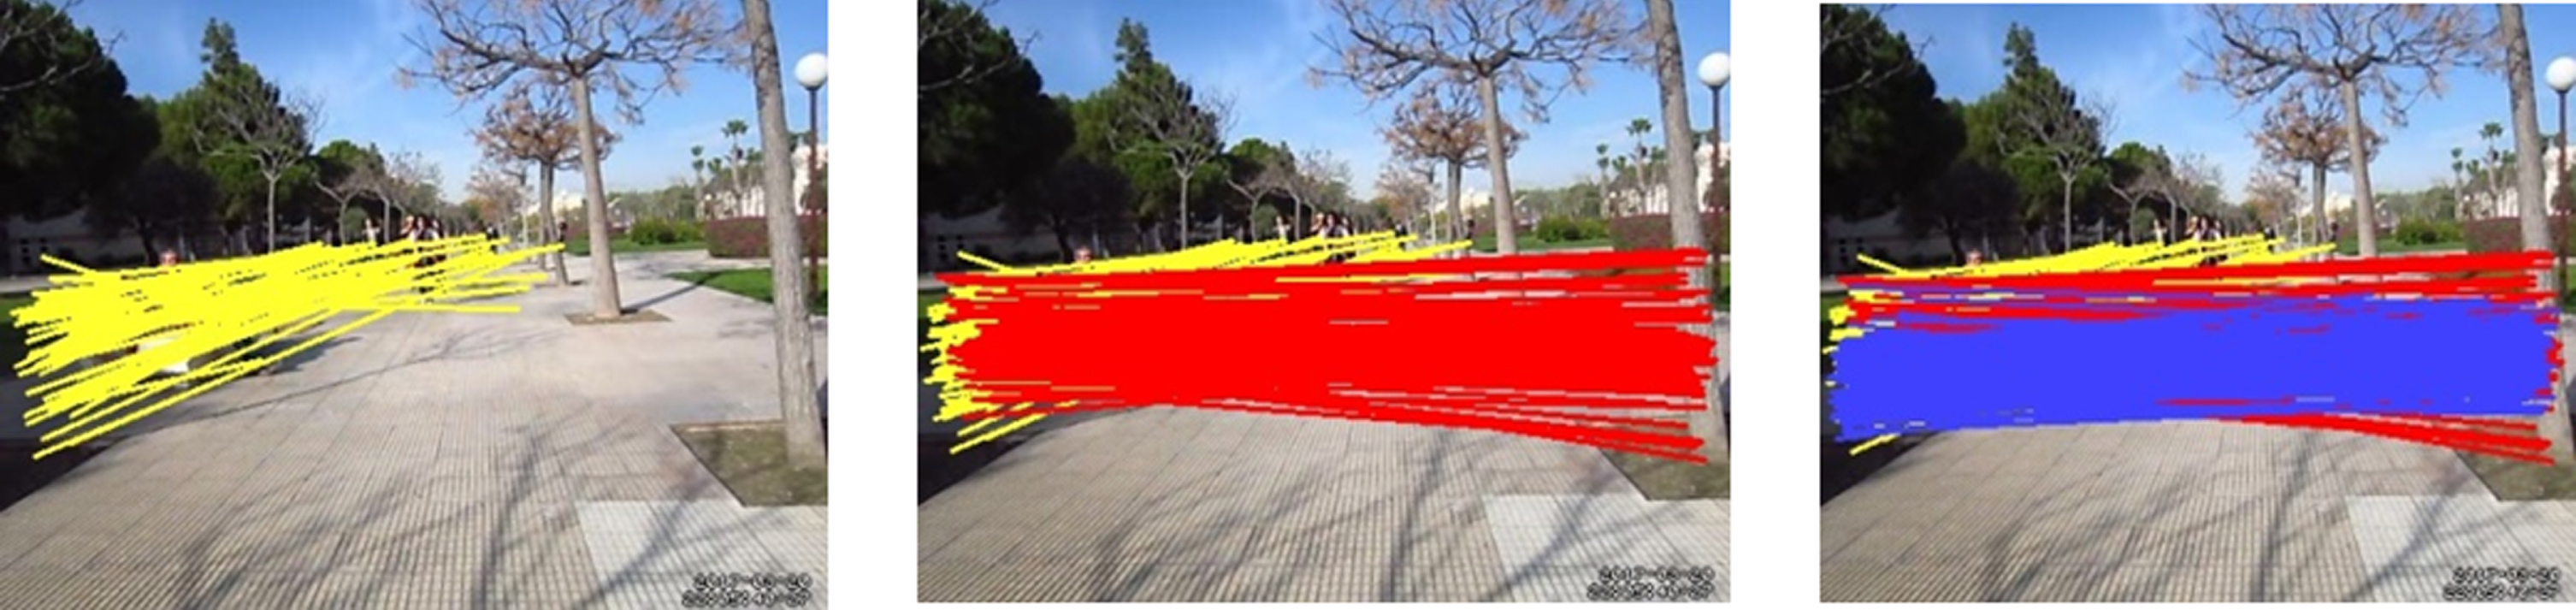 Clustering results of OEIC framework on pedestrian direction recognition dataset.